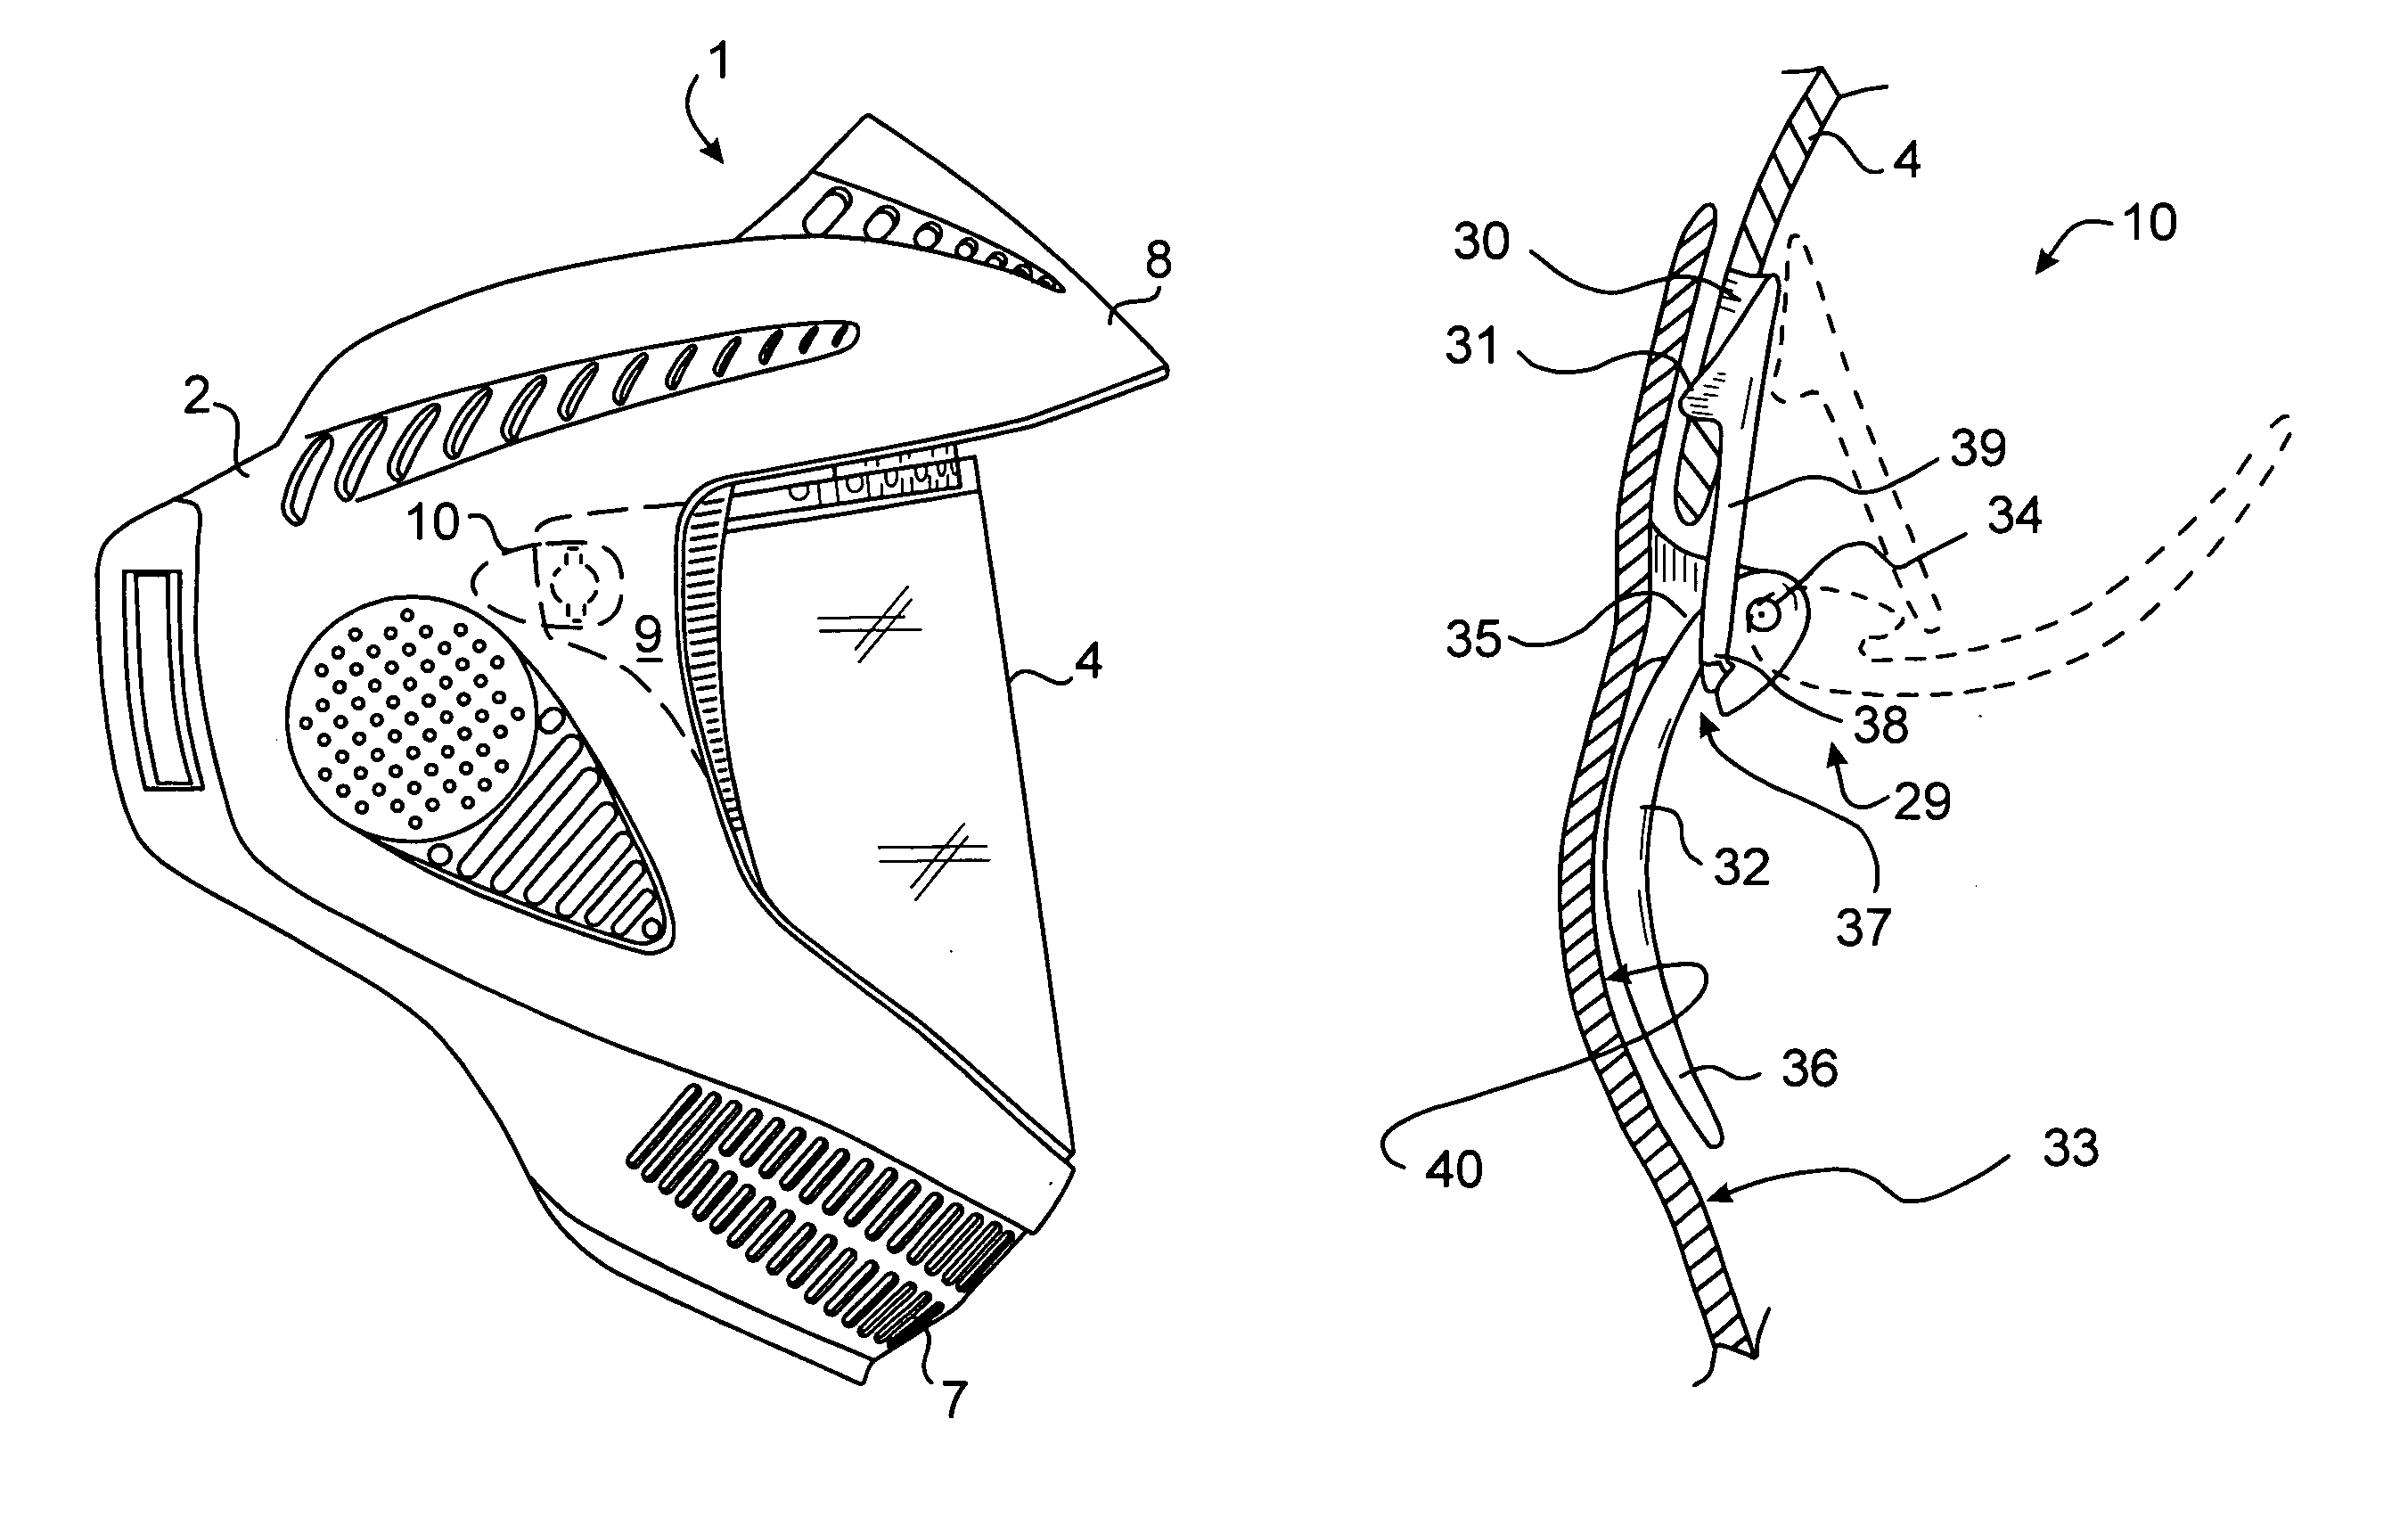 Face mask with detachable eye shield